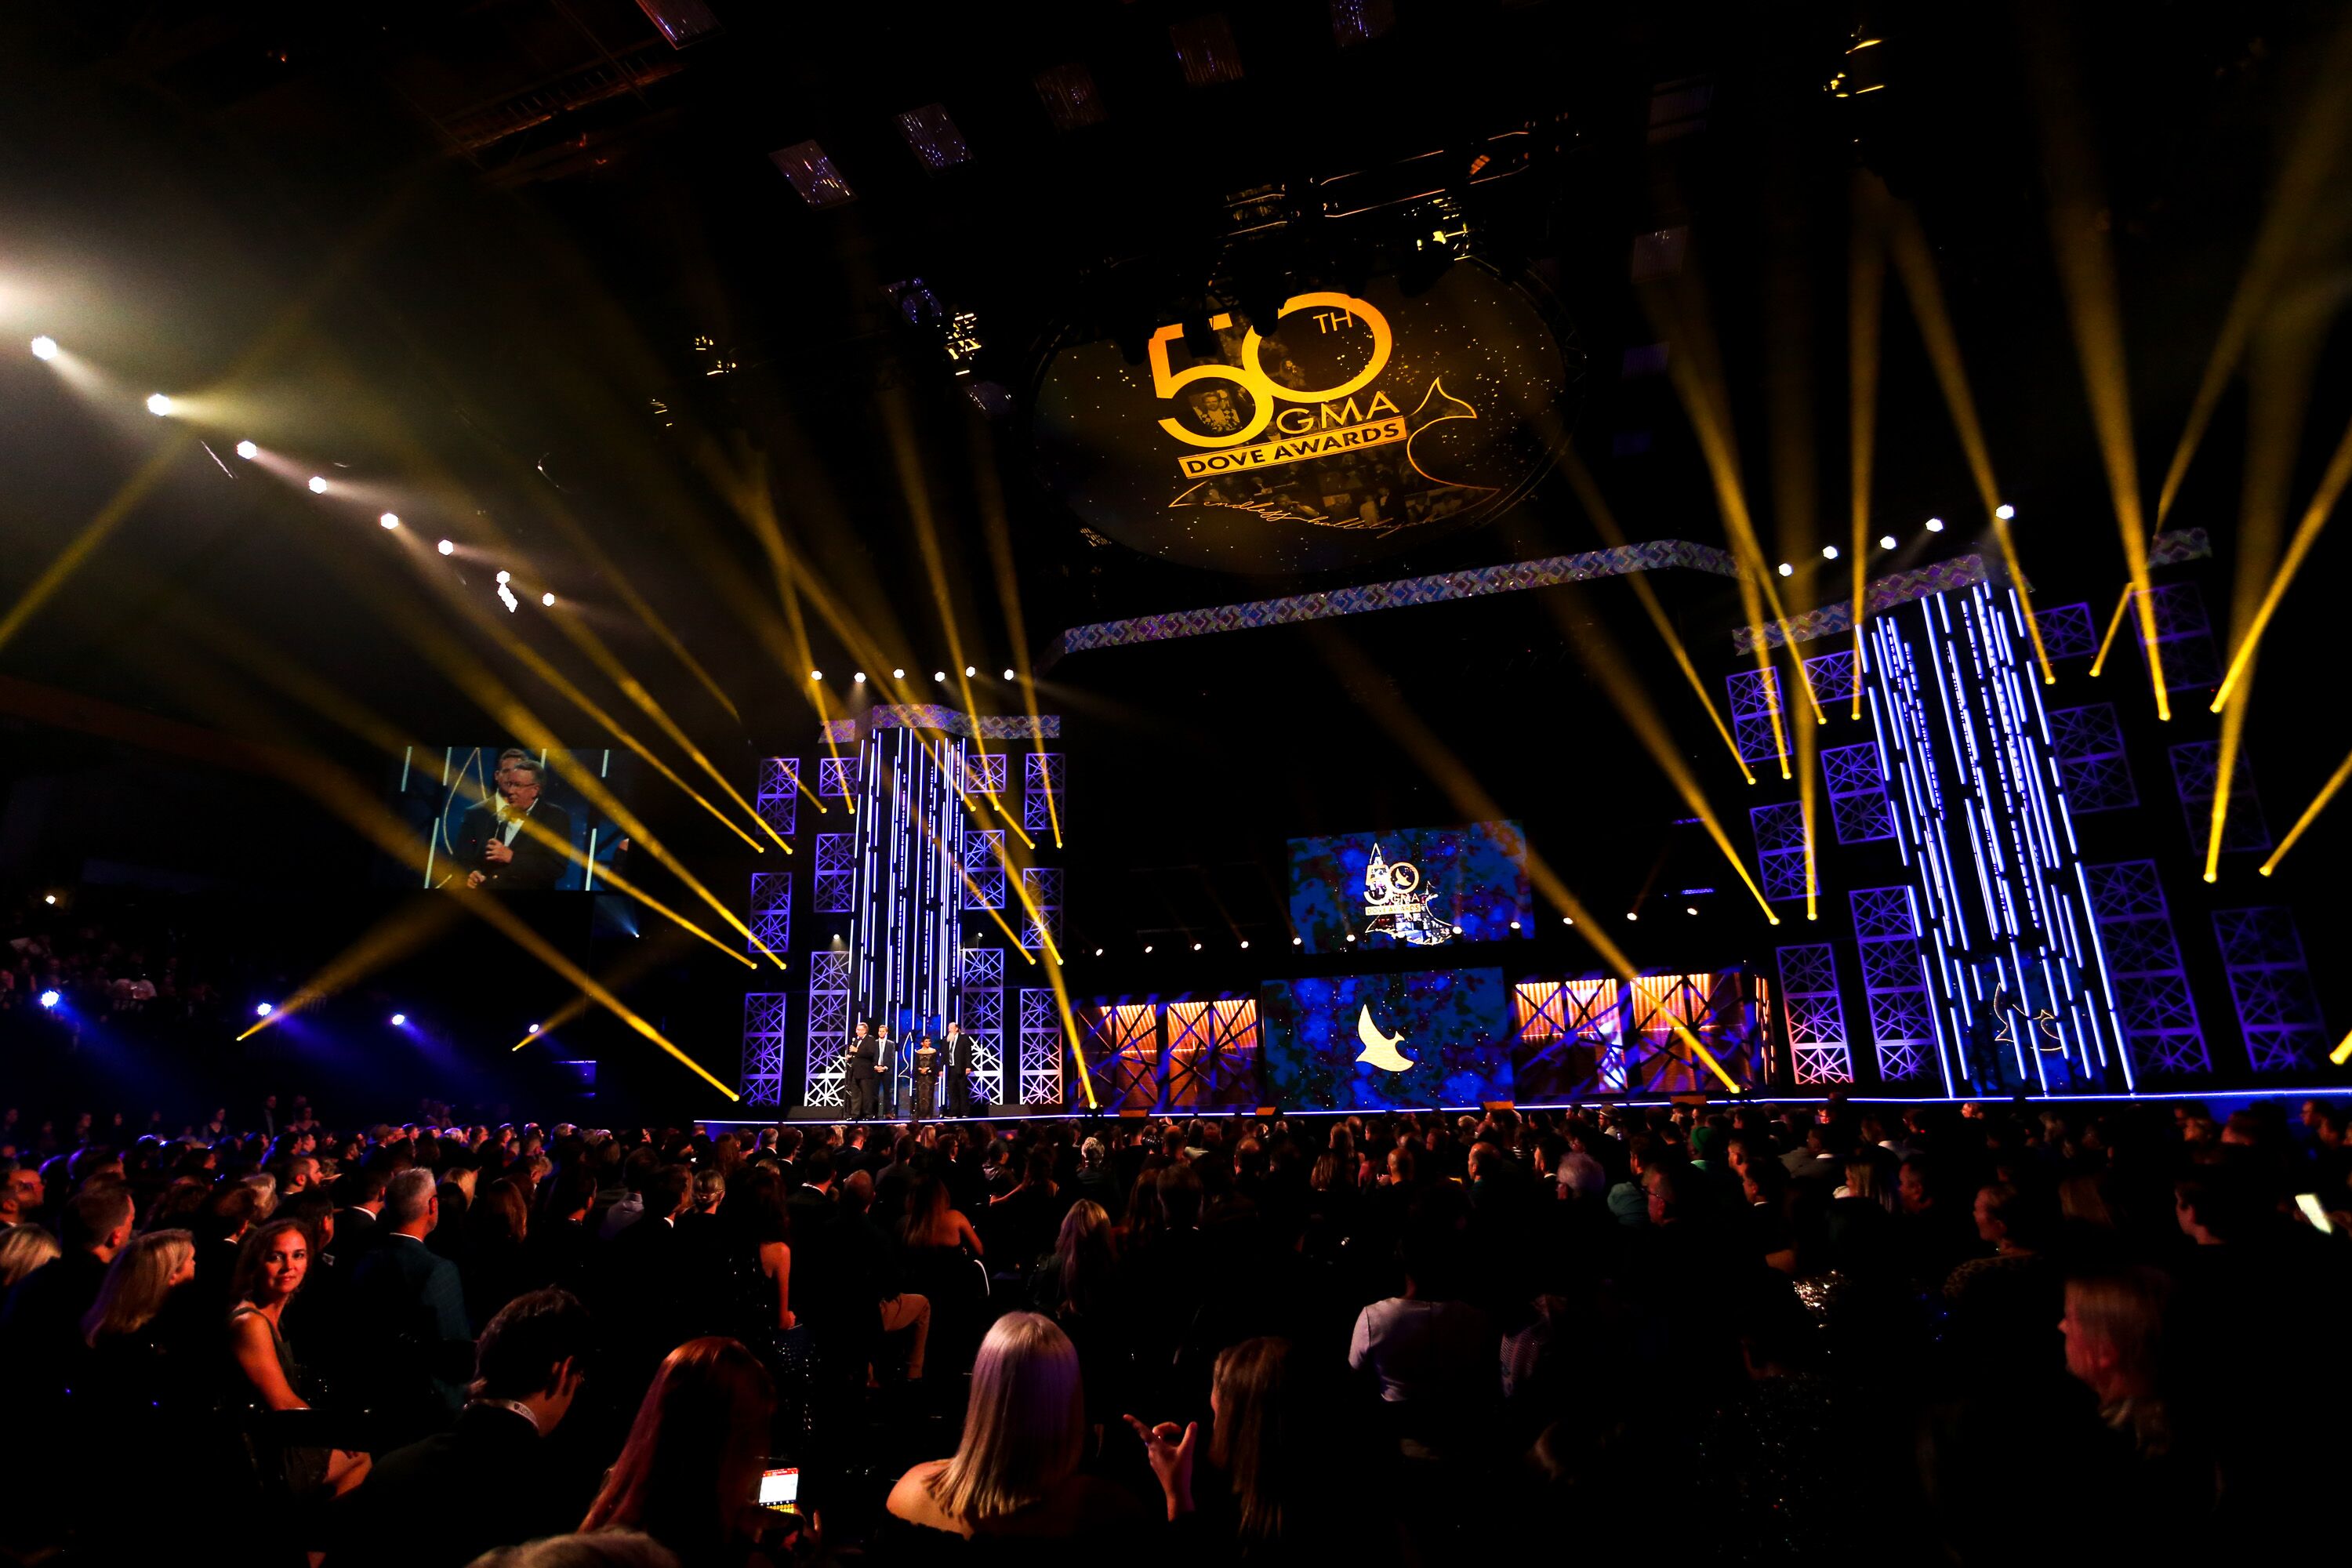 Watch the 50TH ANNUAL GMA DOVE AWARDS TODAY at 8 p.m. EST/ 5 p.m. PST